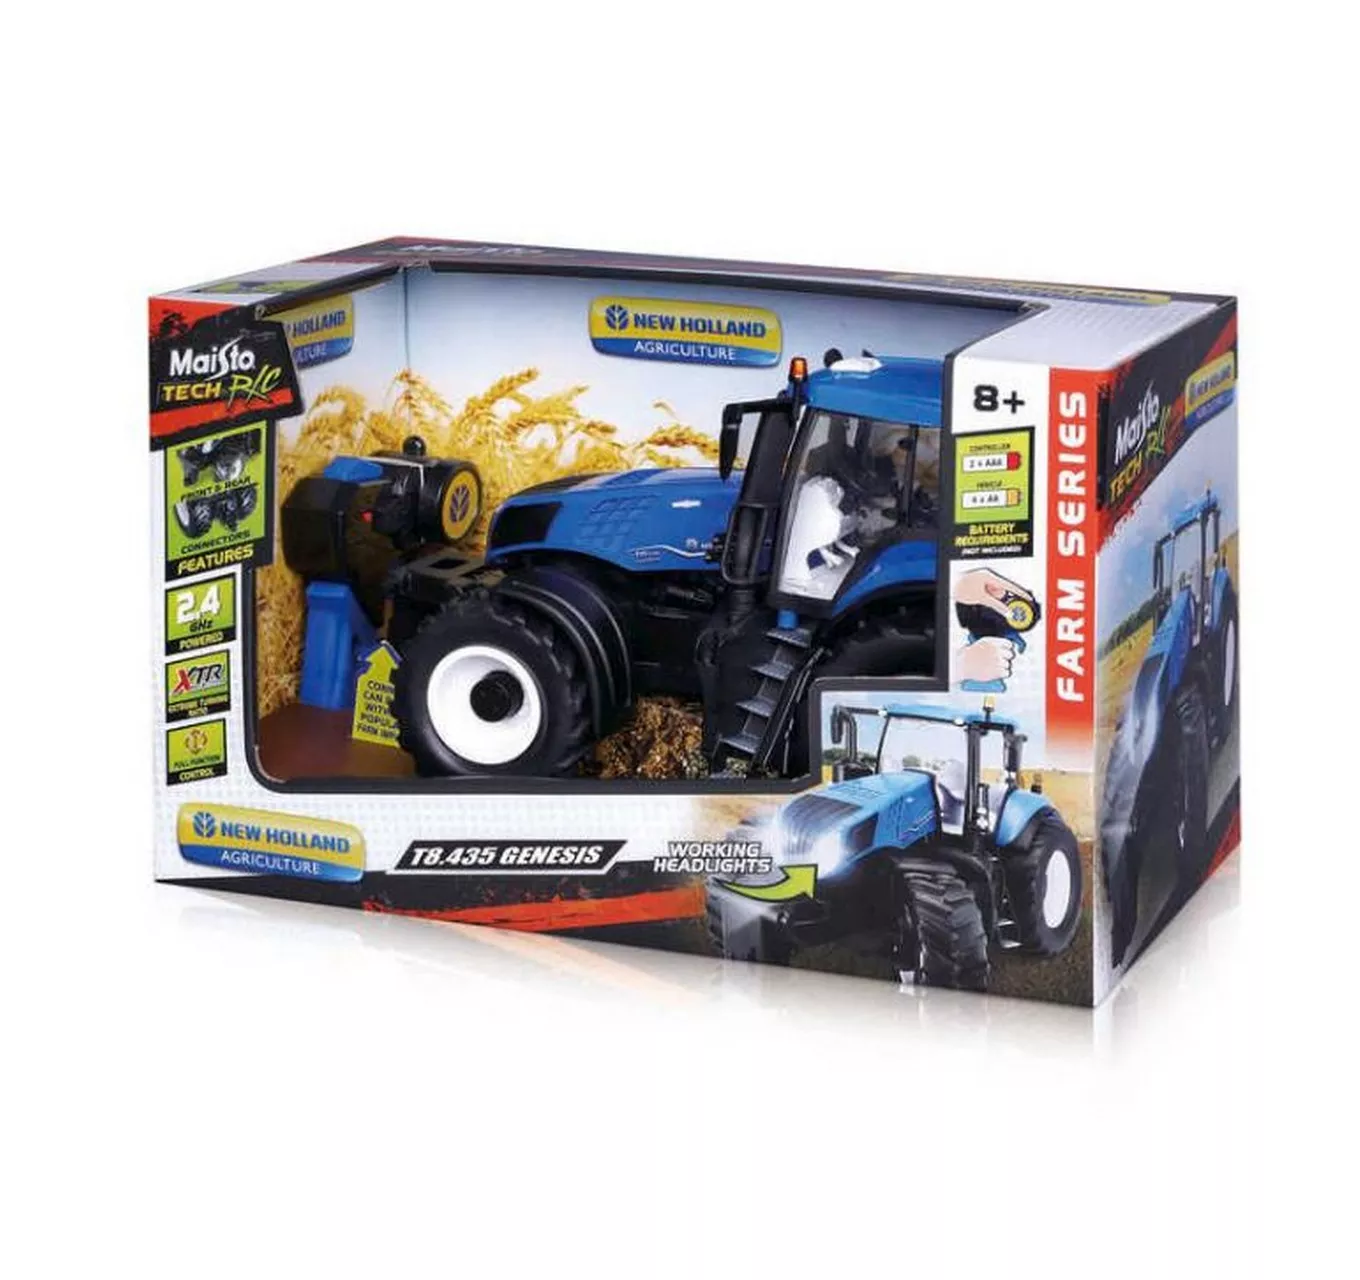 R/C New Holland Tractor